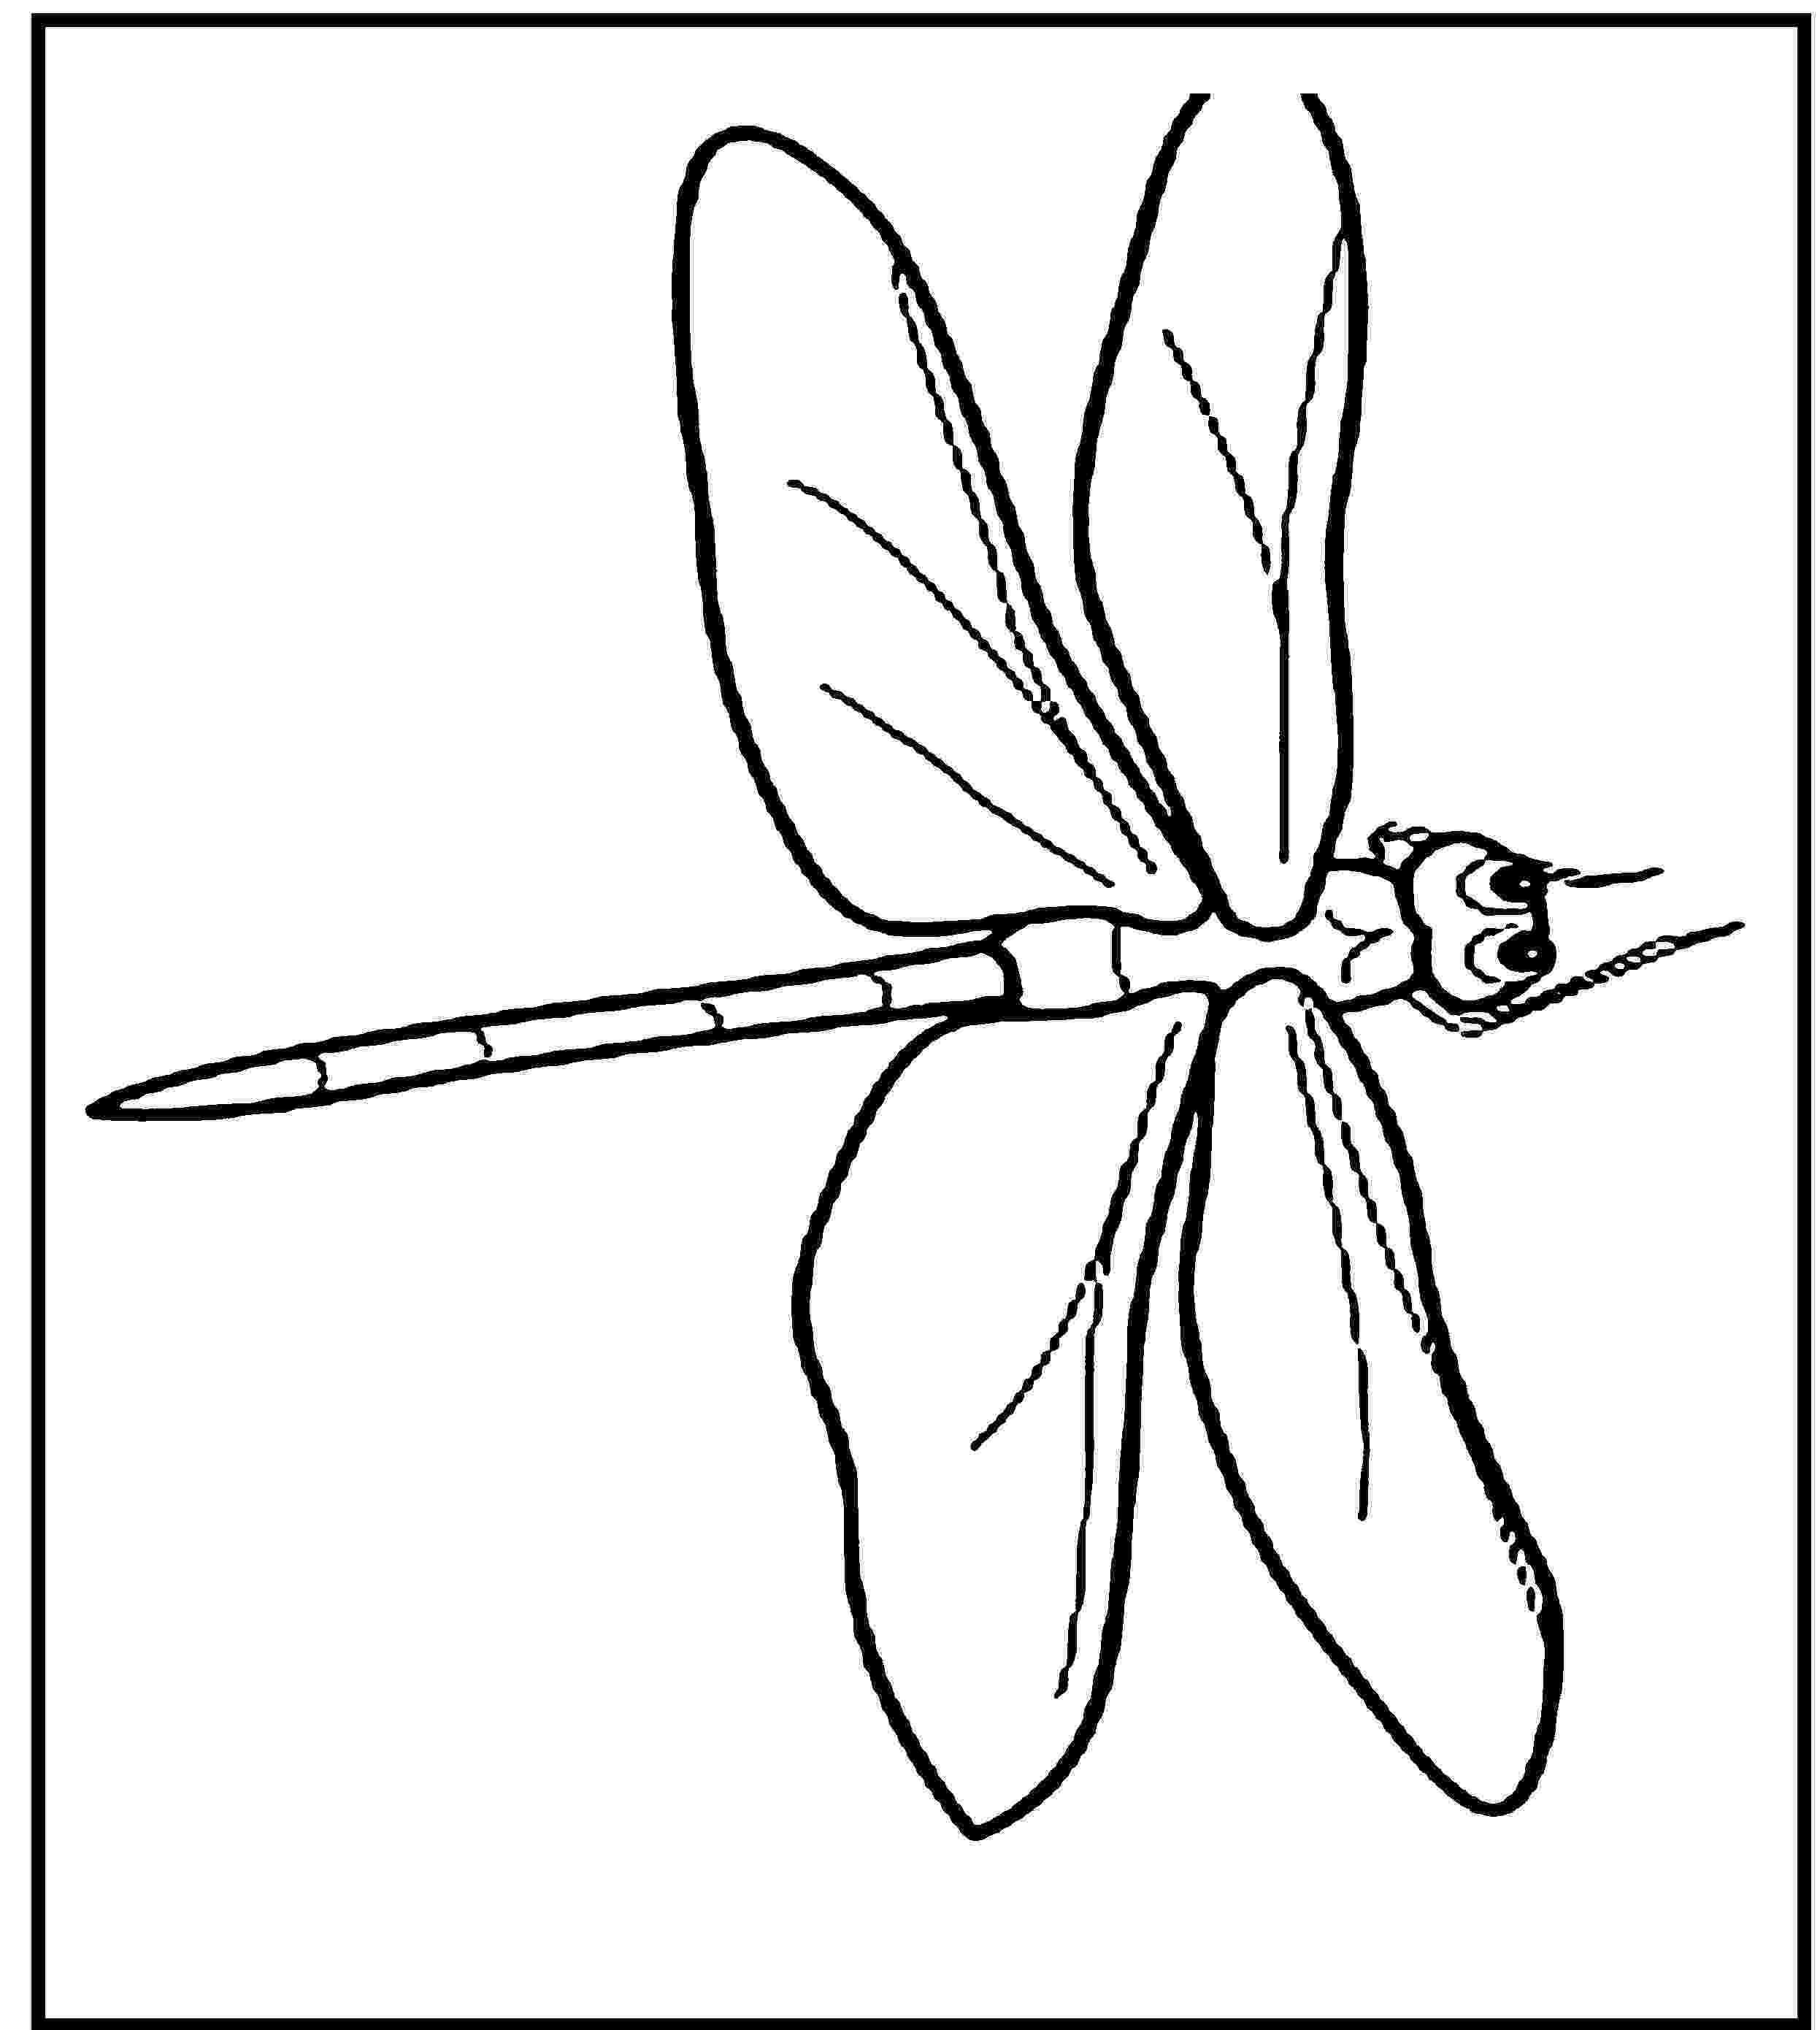 dragonfly coloring page free printable dragonfly coloring pages for kids animal page dragonfly coloring 1 1